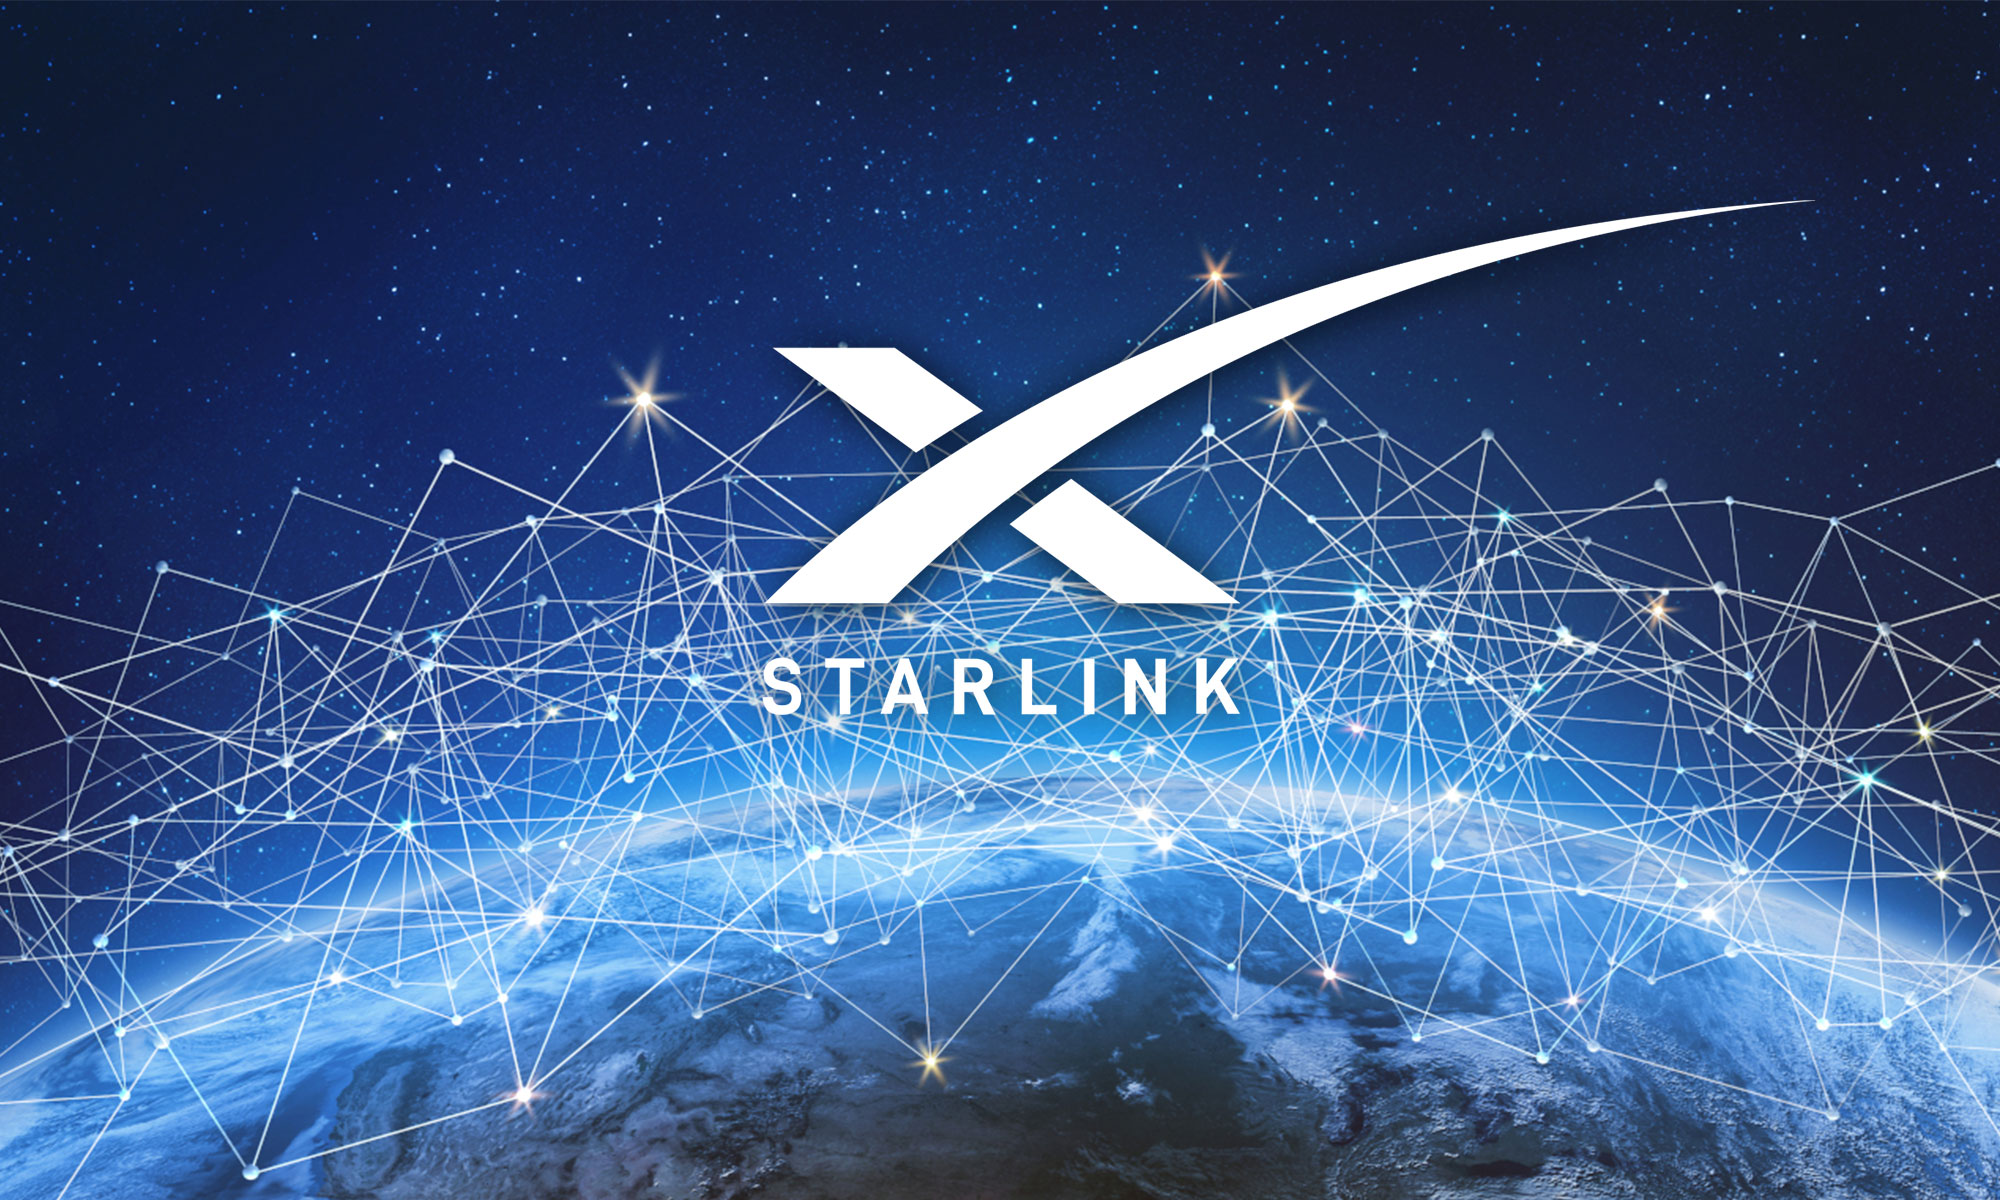 Elon Musk supported Ukraine and announced the launch of Starlink satellite Internet